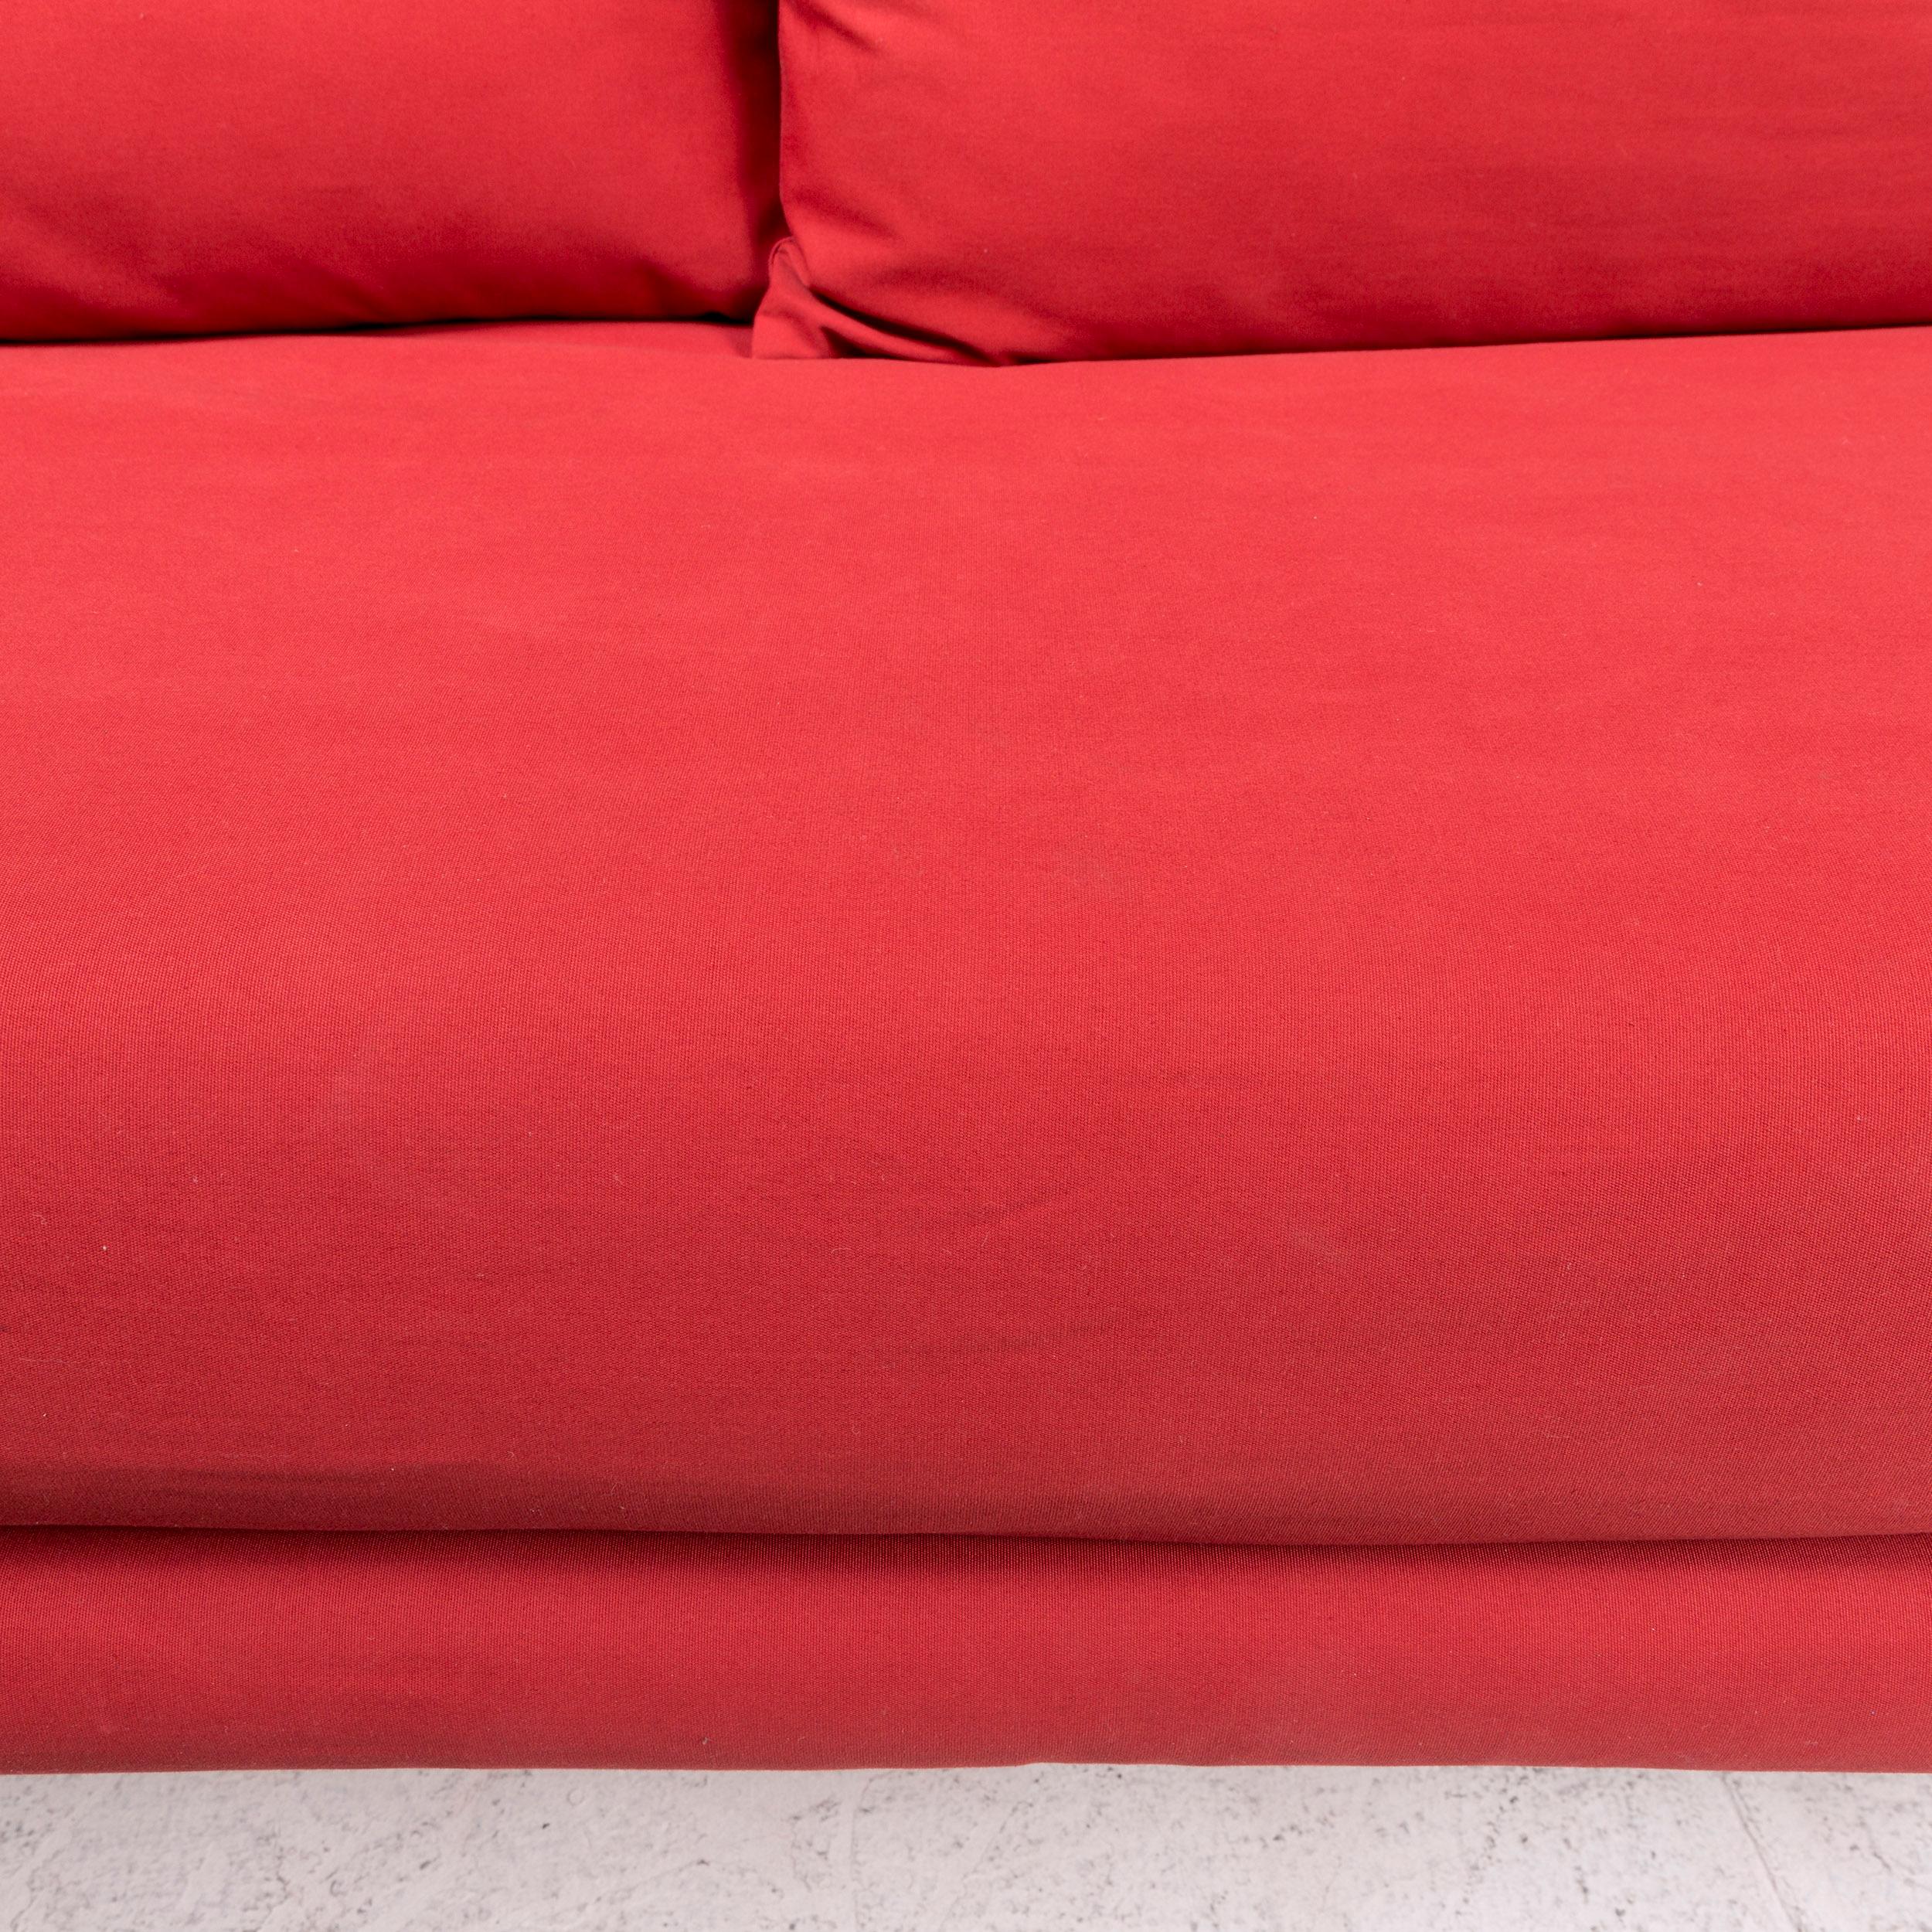 French Ligne Roset Multy Fabric Sofa Bed Red Sofa Sleep Function Couch